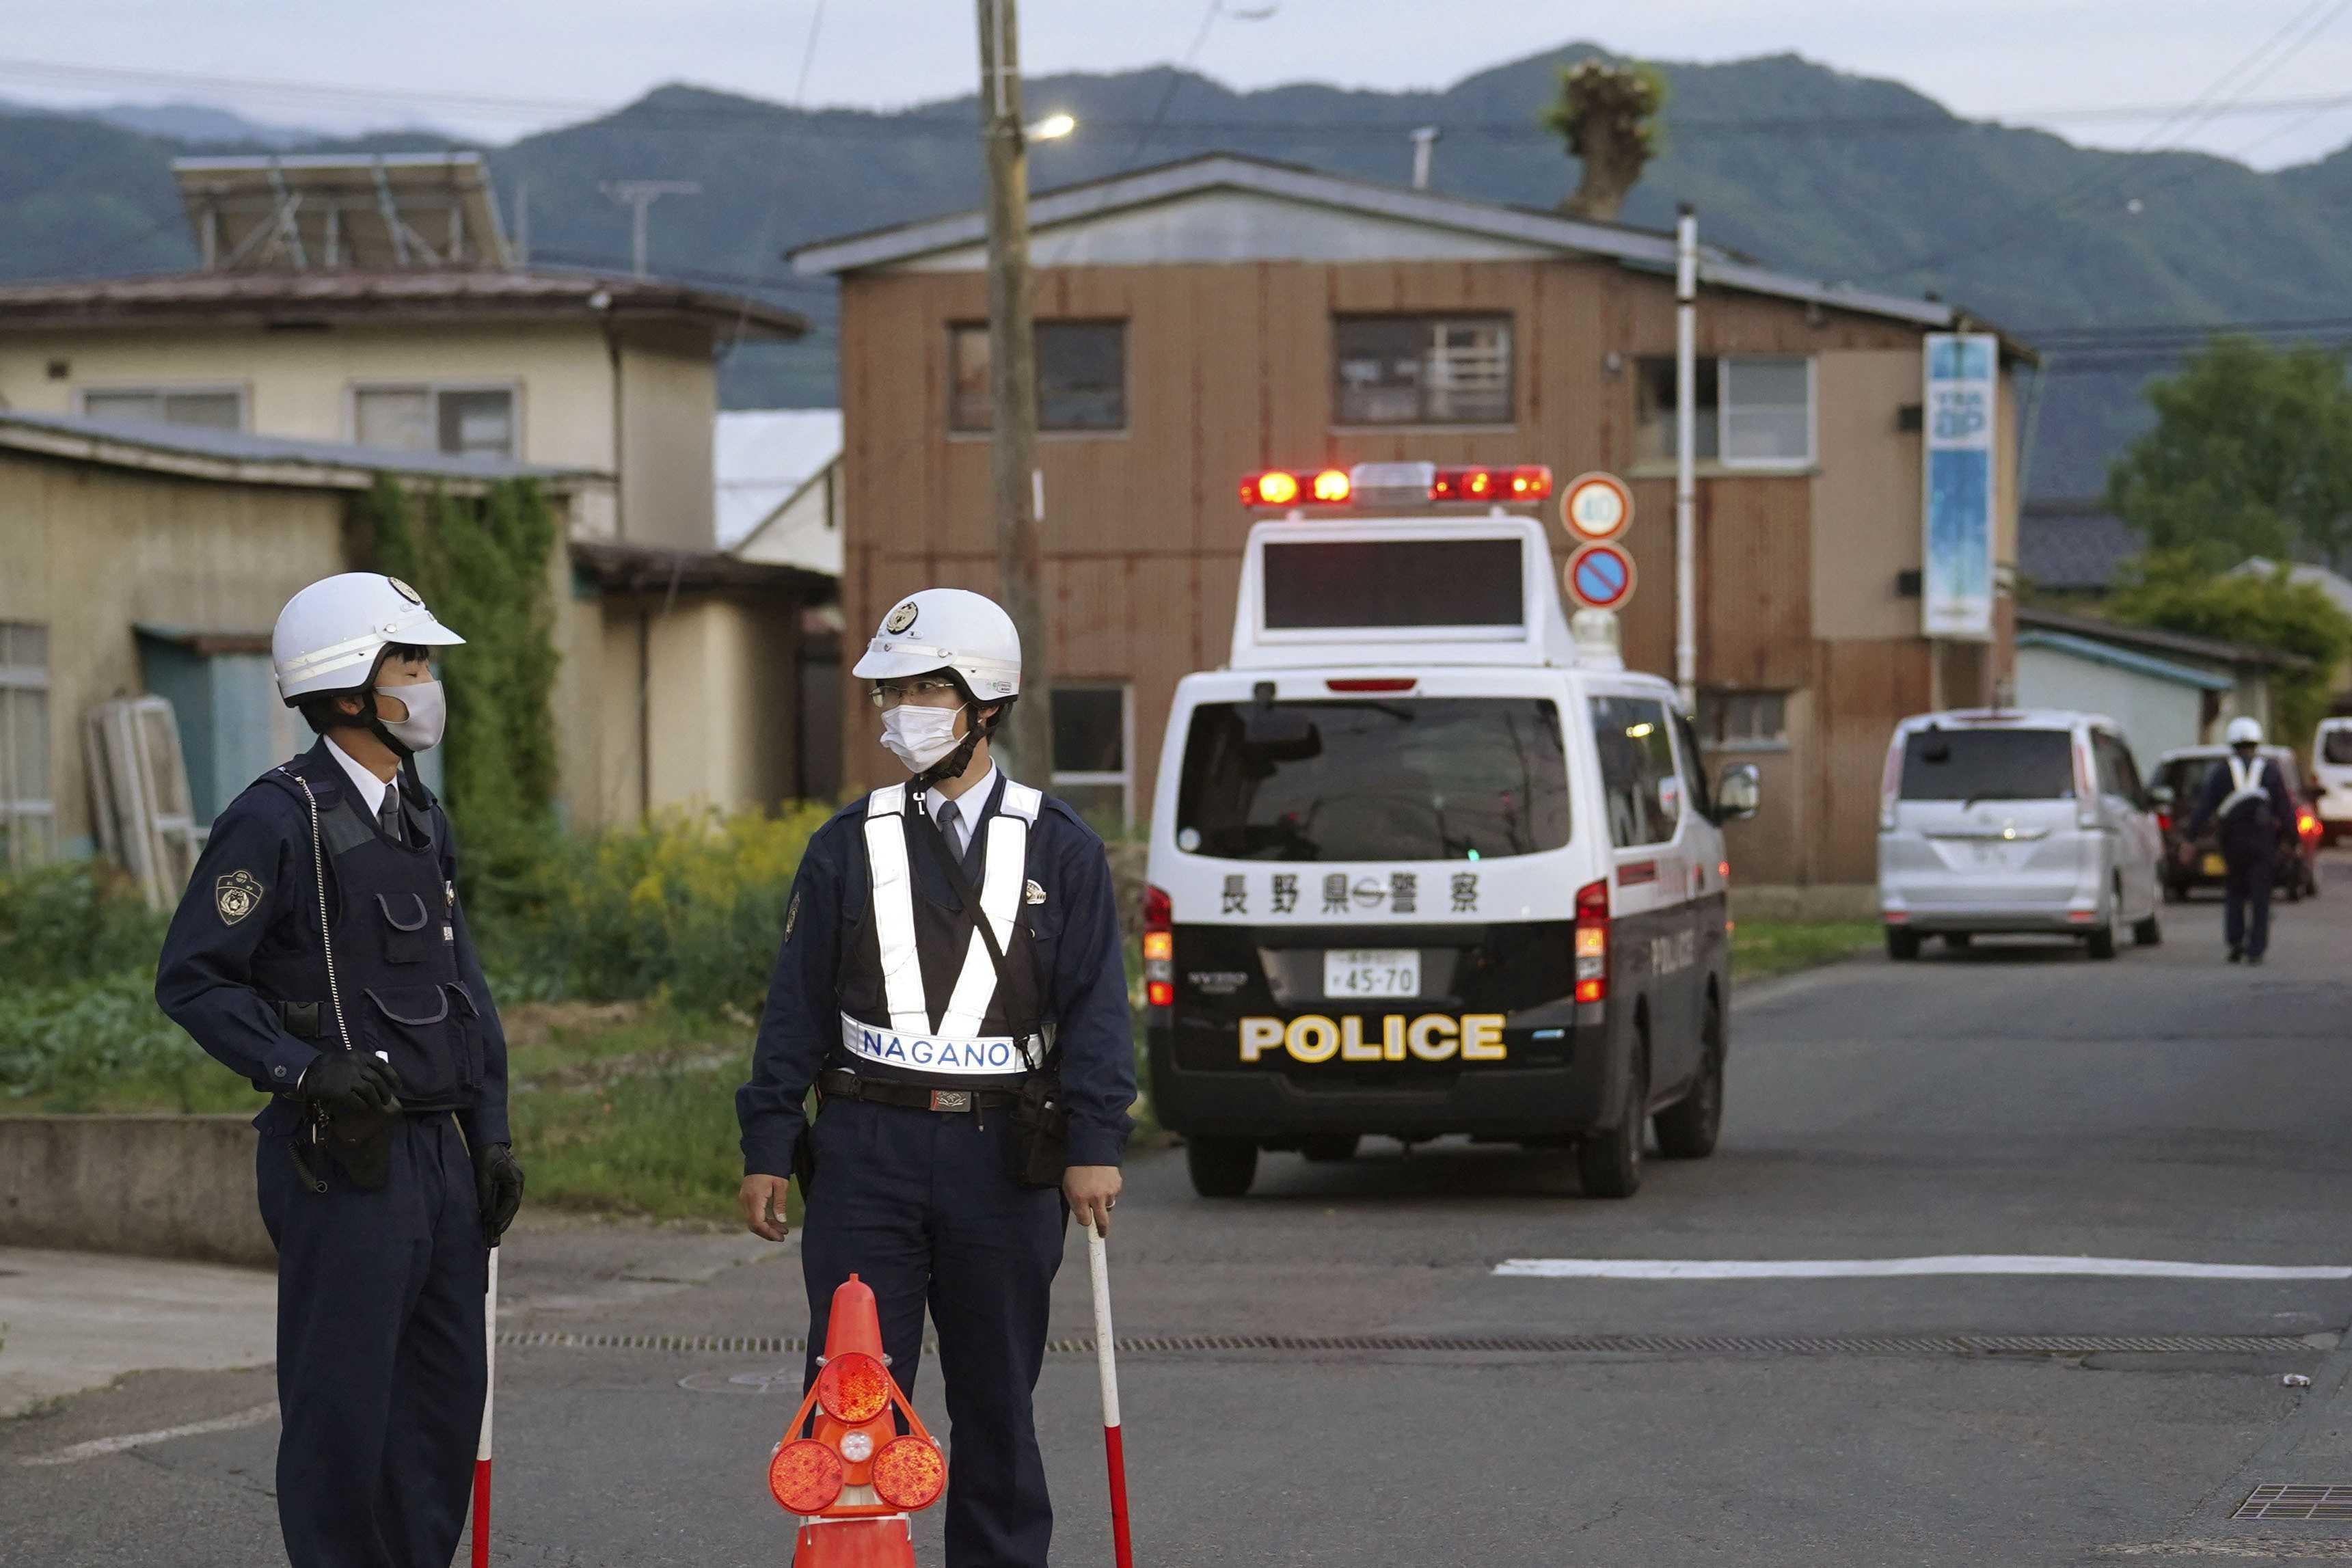 Police officers stand near the scene of a stabbing and shooting incident in Nakano, Nagano Prefecture, Japan, in this photo taken by Kyodo on May 25. Photo: Reuters